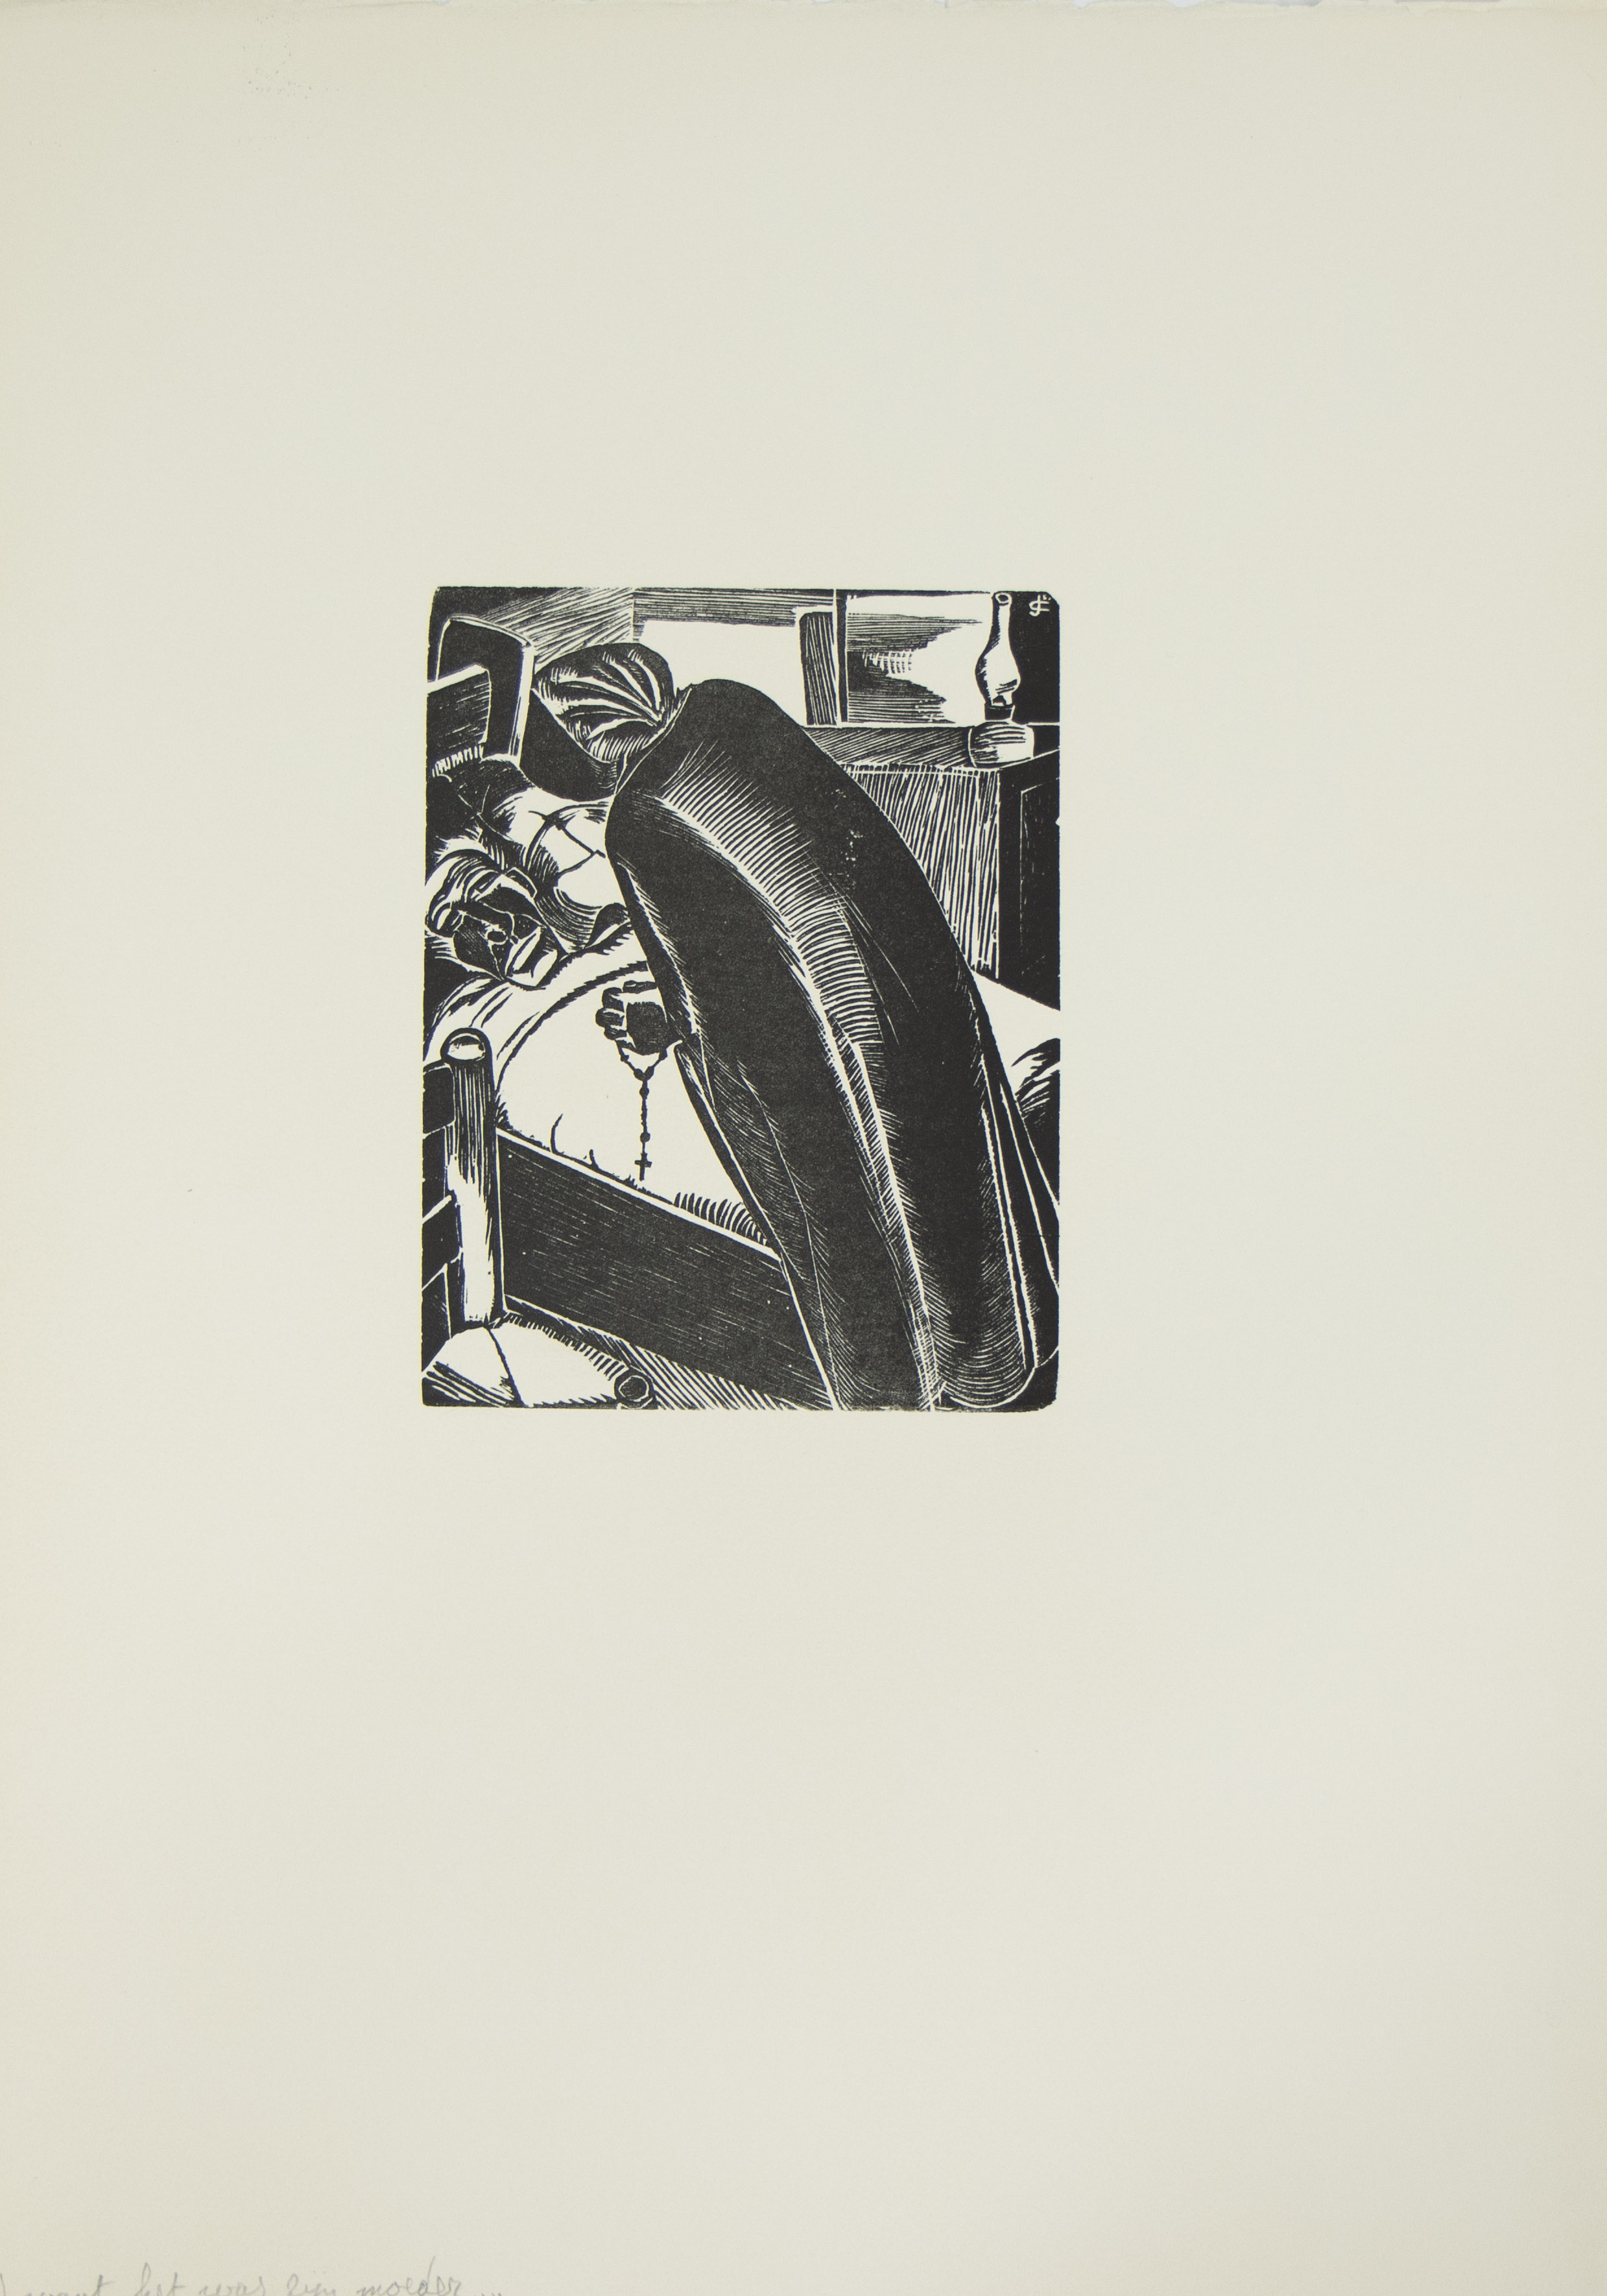 Jozef CANTRÉ (1890-1957), full stretch of woodcuts for 'the peasant dying' by Karel van de Woestijne - Image 14 of 16